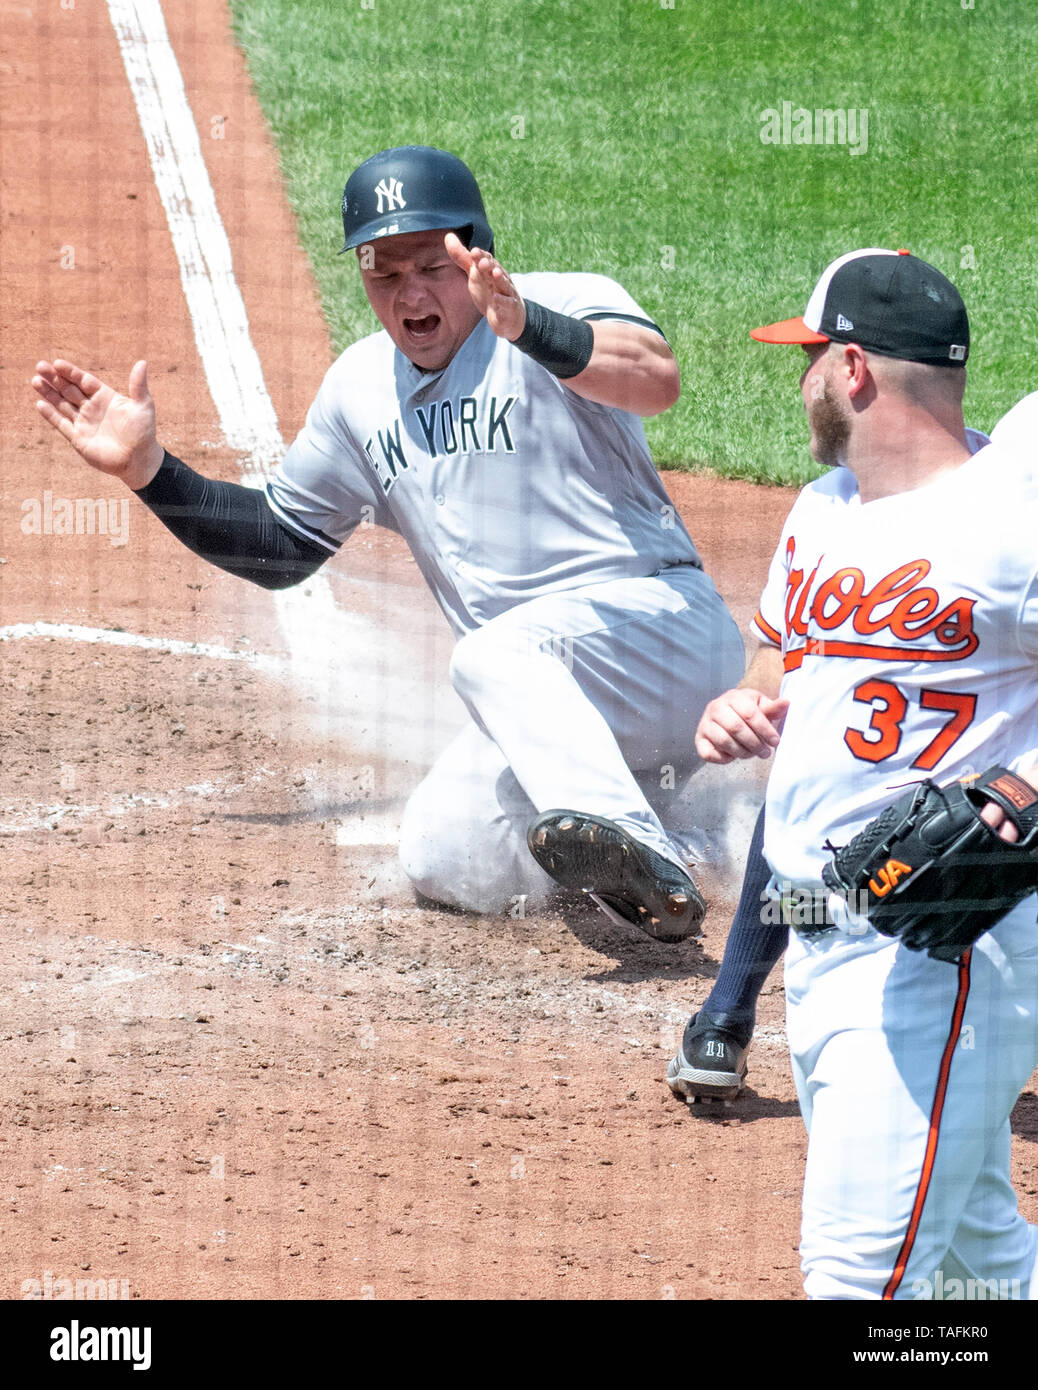 New York Yankees designated hitter Luke Voit (45) celebrates as he scores his team's third run in the sixth inning against the Baltimore Orioles at Oriole Park at Camden Yards in Baltimore, MD on Thursday, May 23, 2019. Looking on is Baltimore Orioles starting pitcher Dylan Bundy (37). Credit: Ron Sachs/CNP (RESTRICTION: NO New York or New Jersey Newspapers or newspapers within a 75 mile radius of New York City) | usage worldwide Stock Photo